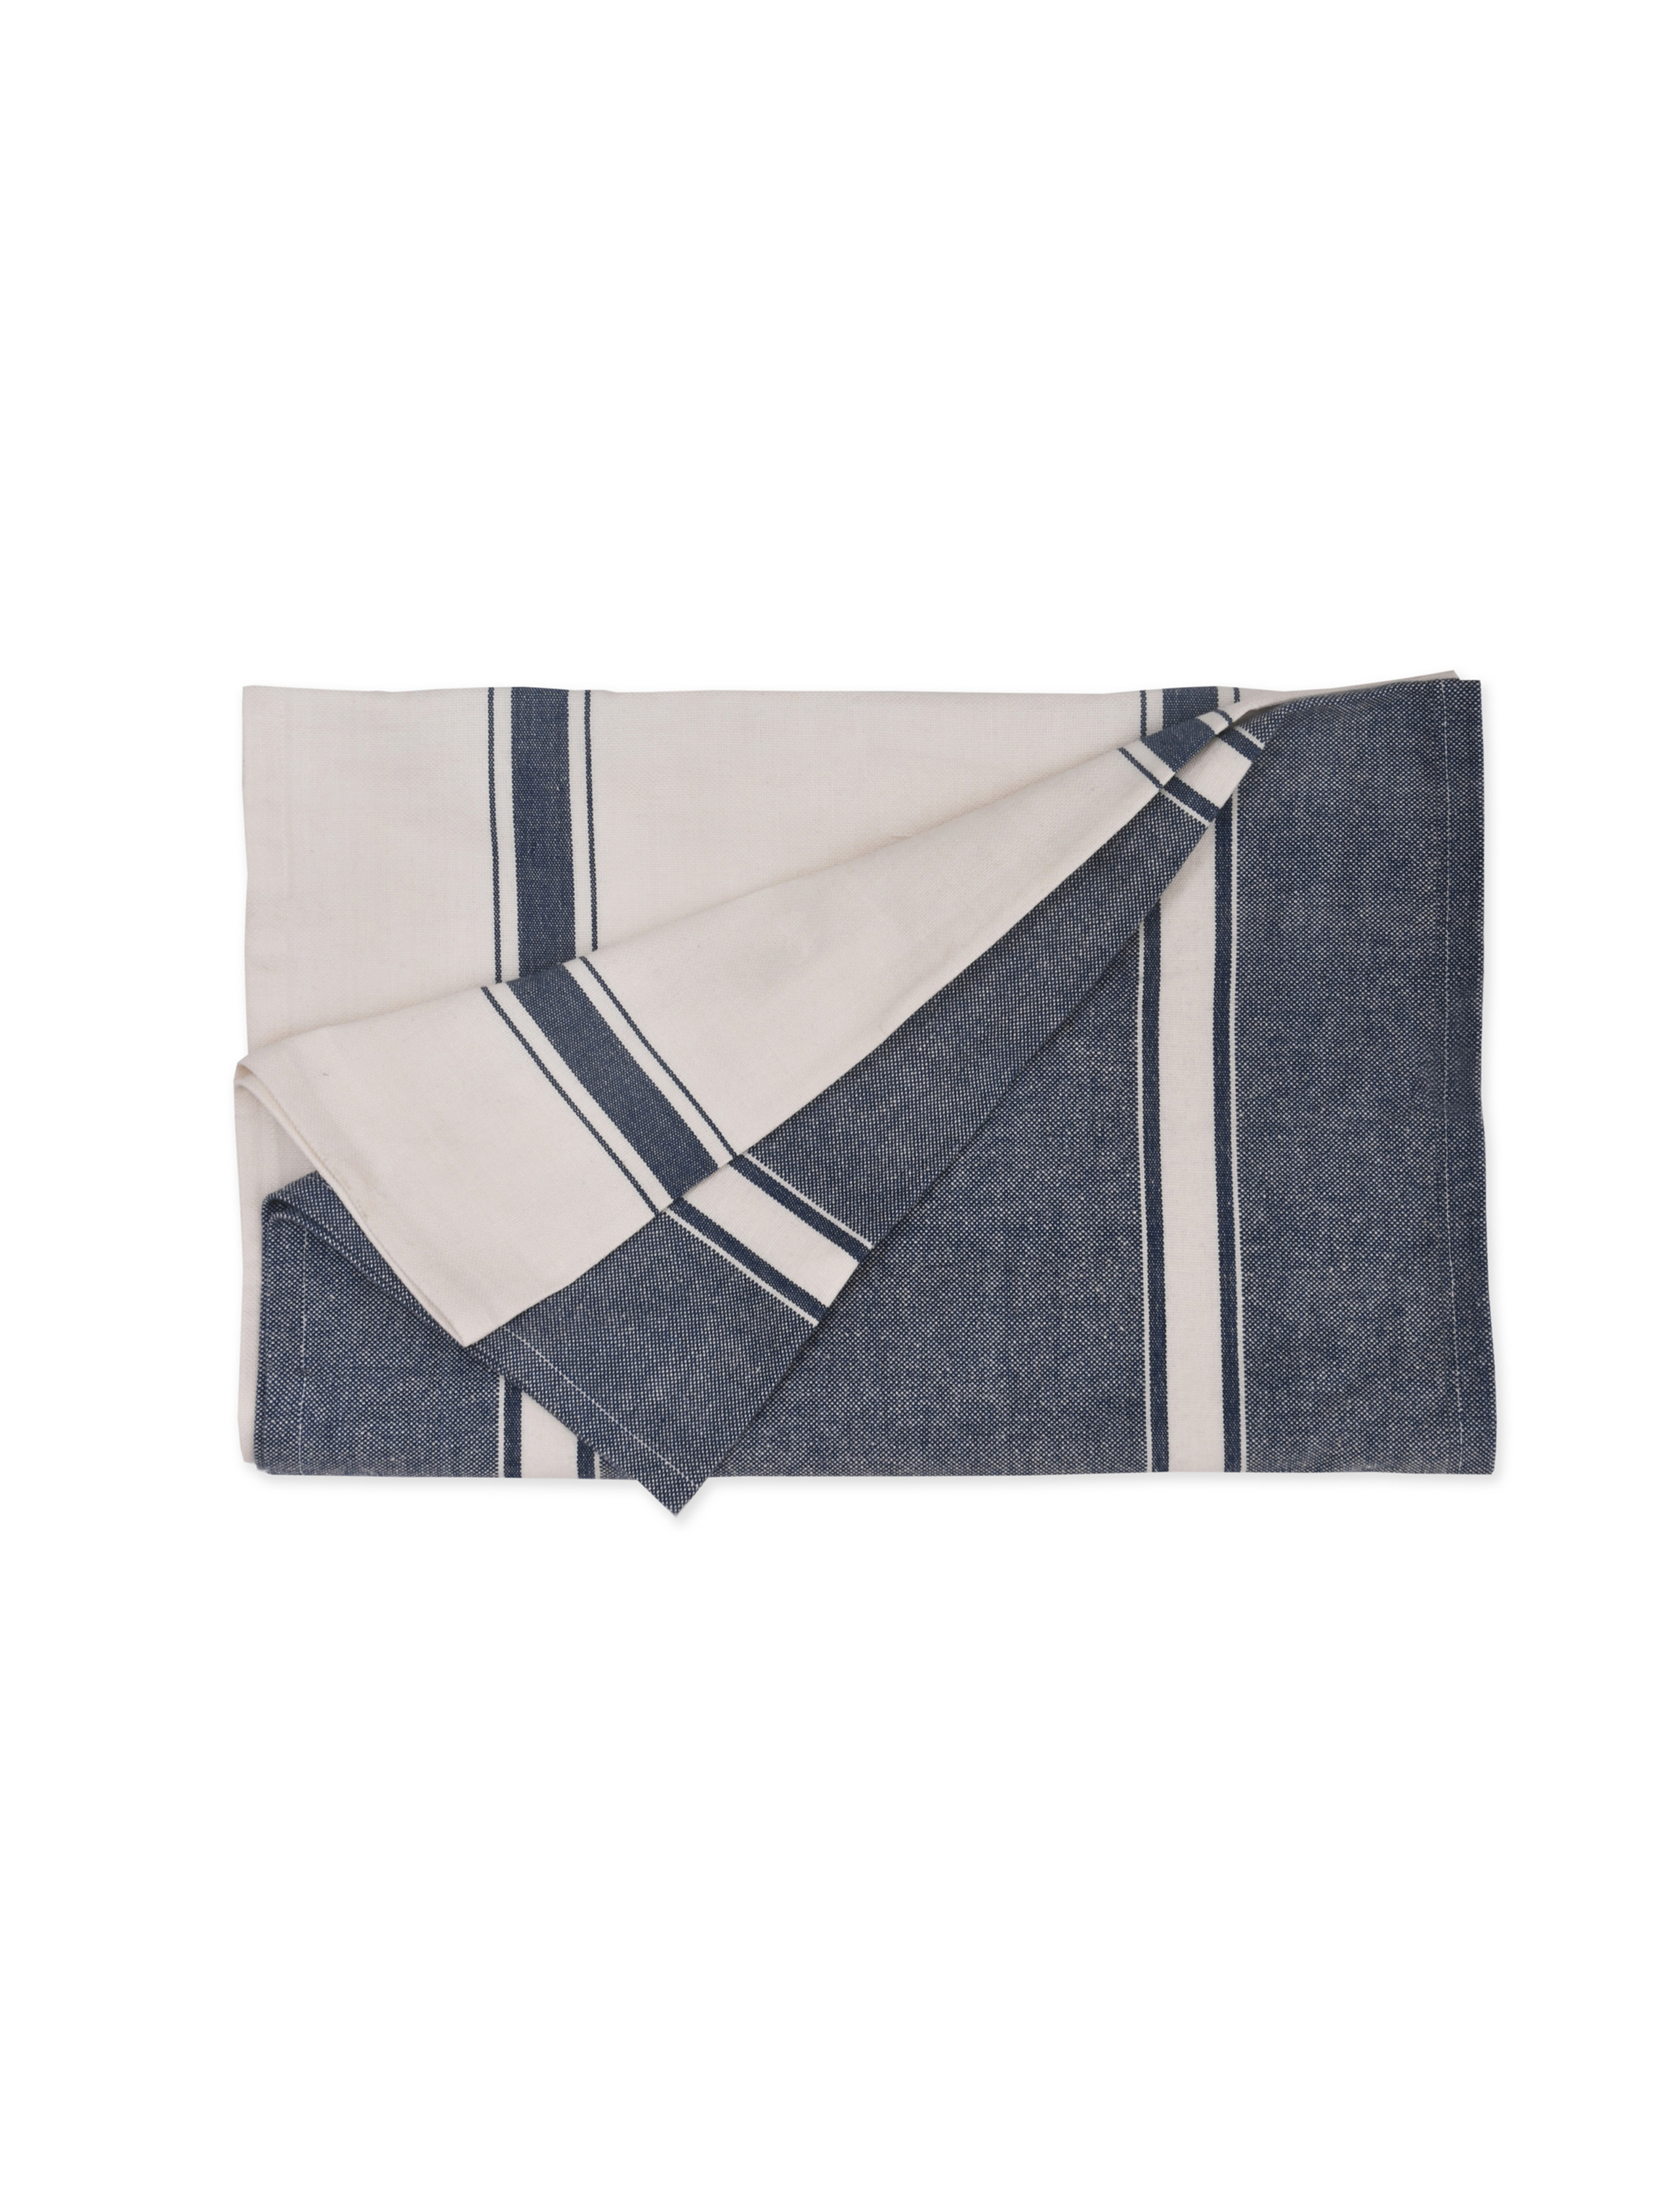 Garden Trading Set of 2 White and Ink Striped Cotton Tea Towels